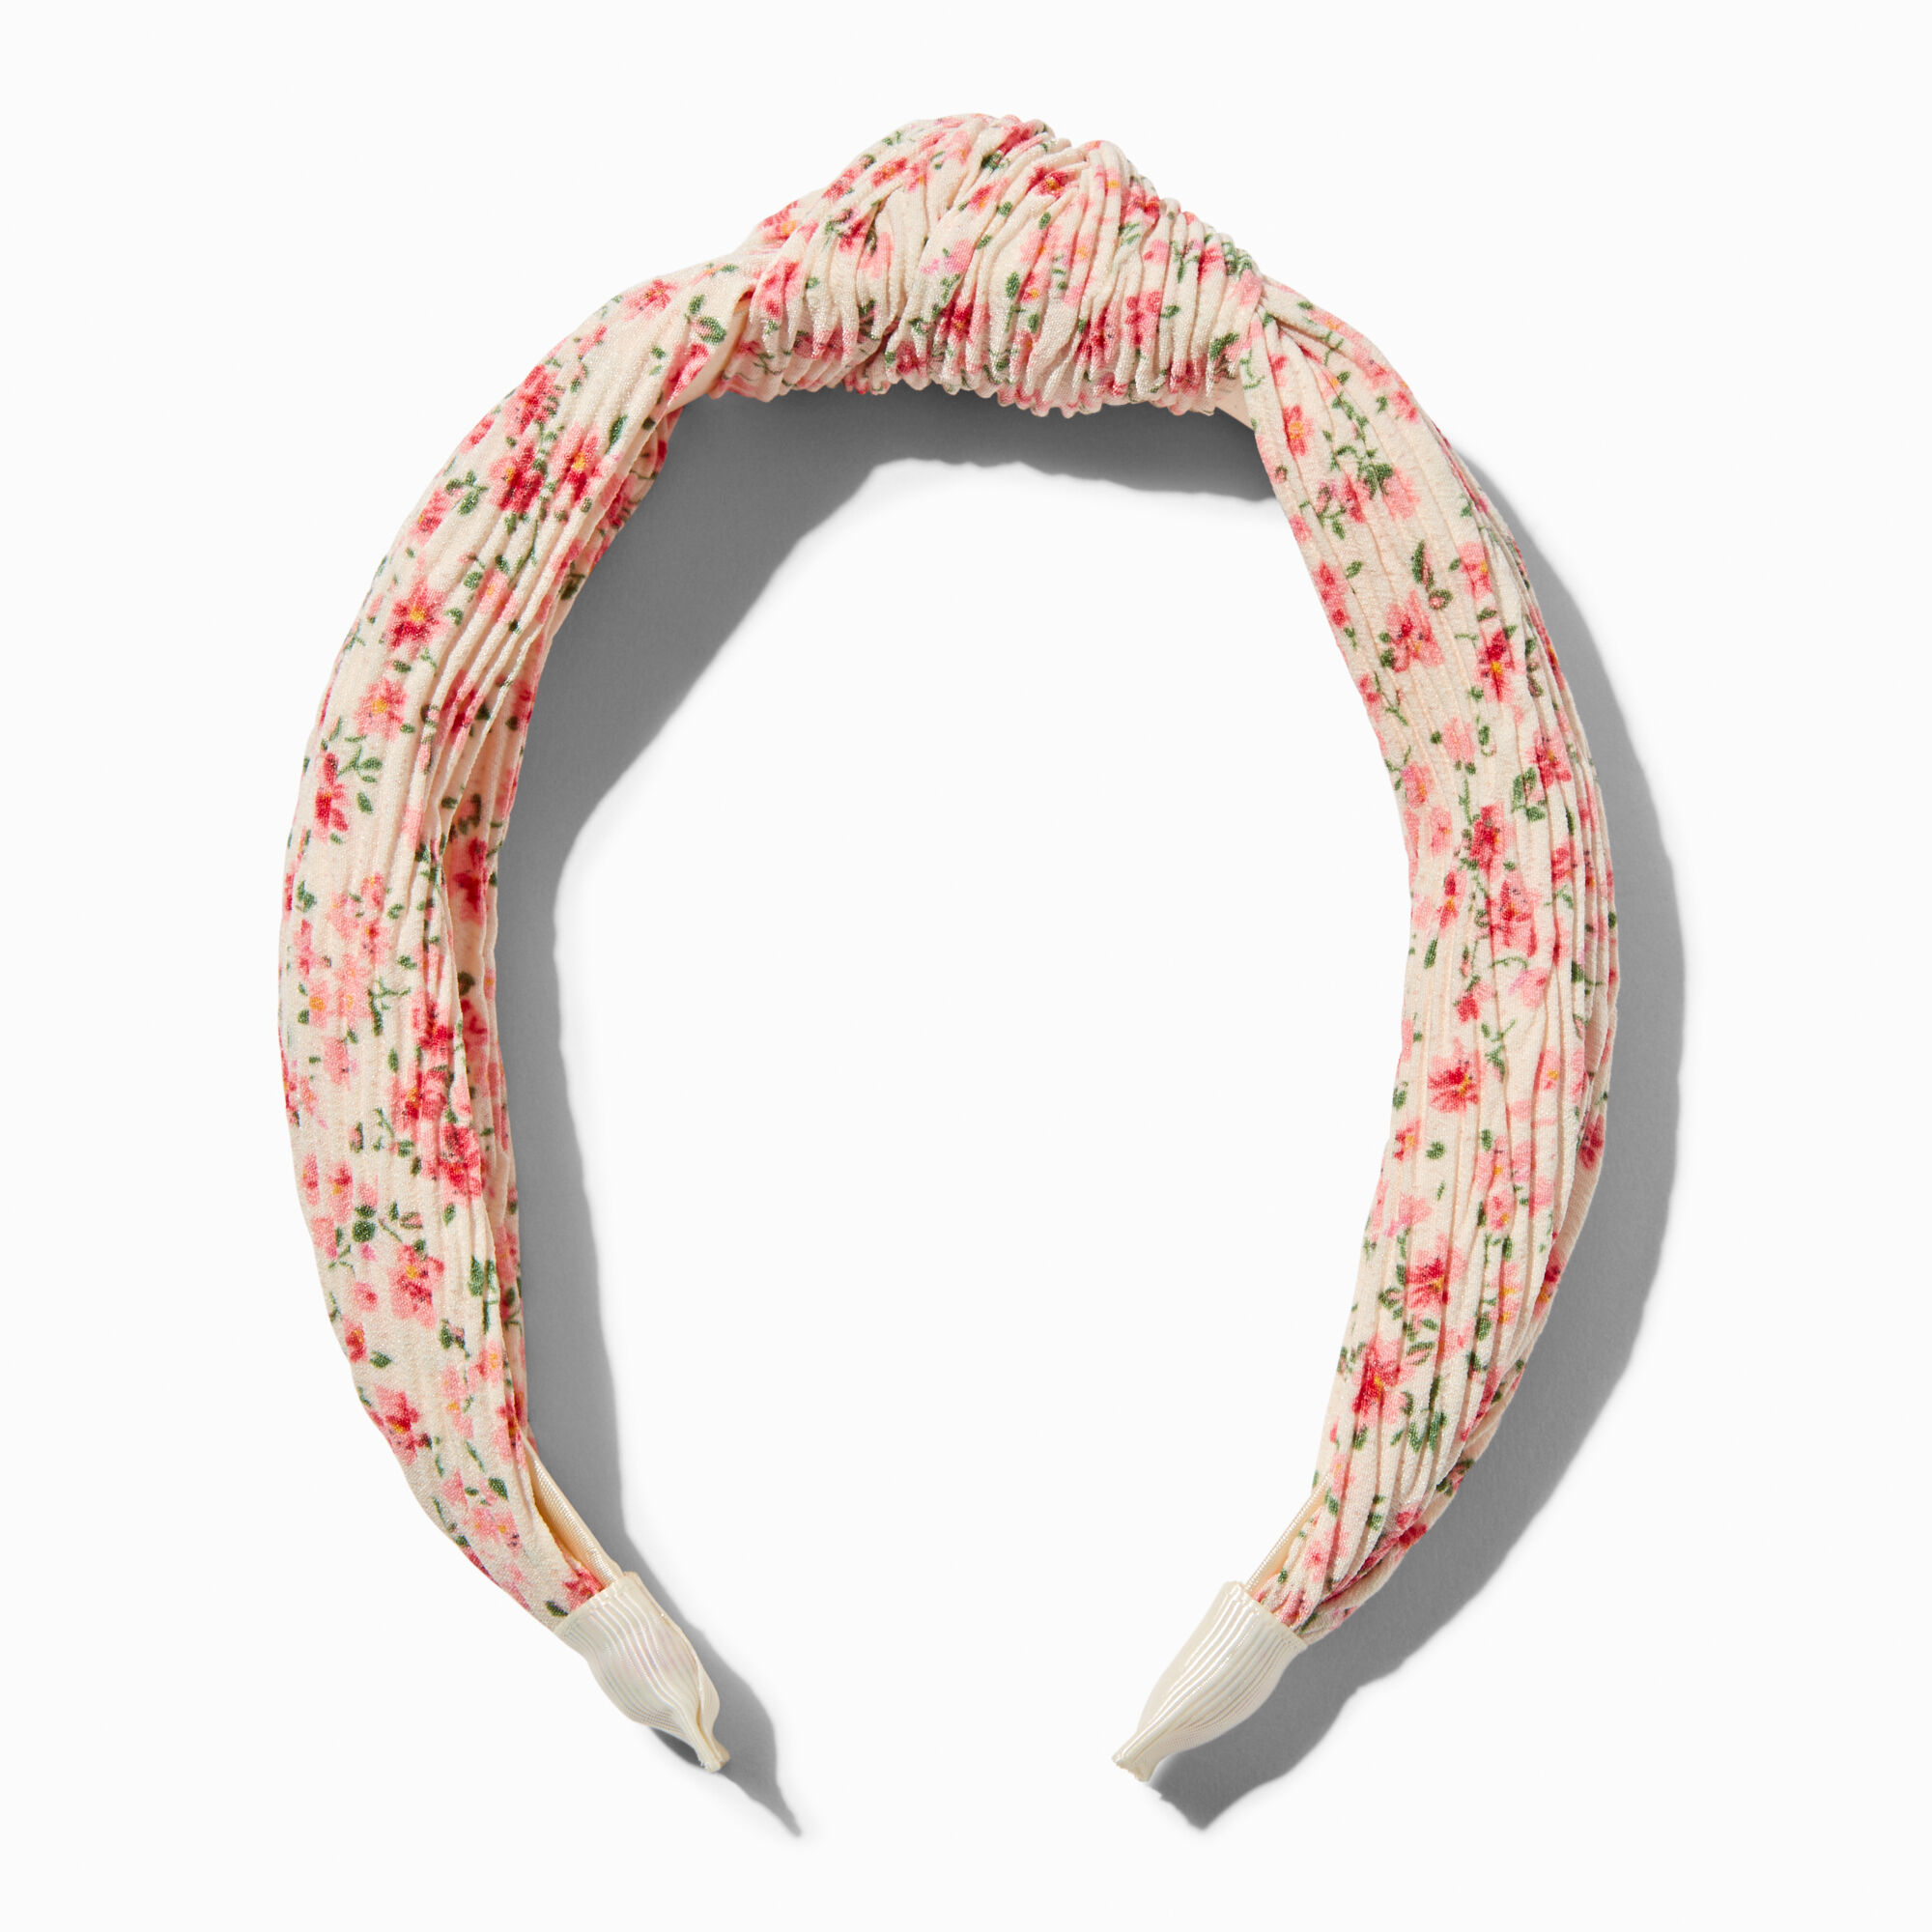 View Claires Pleated Floral Knotted Headband Pink information